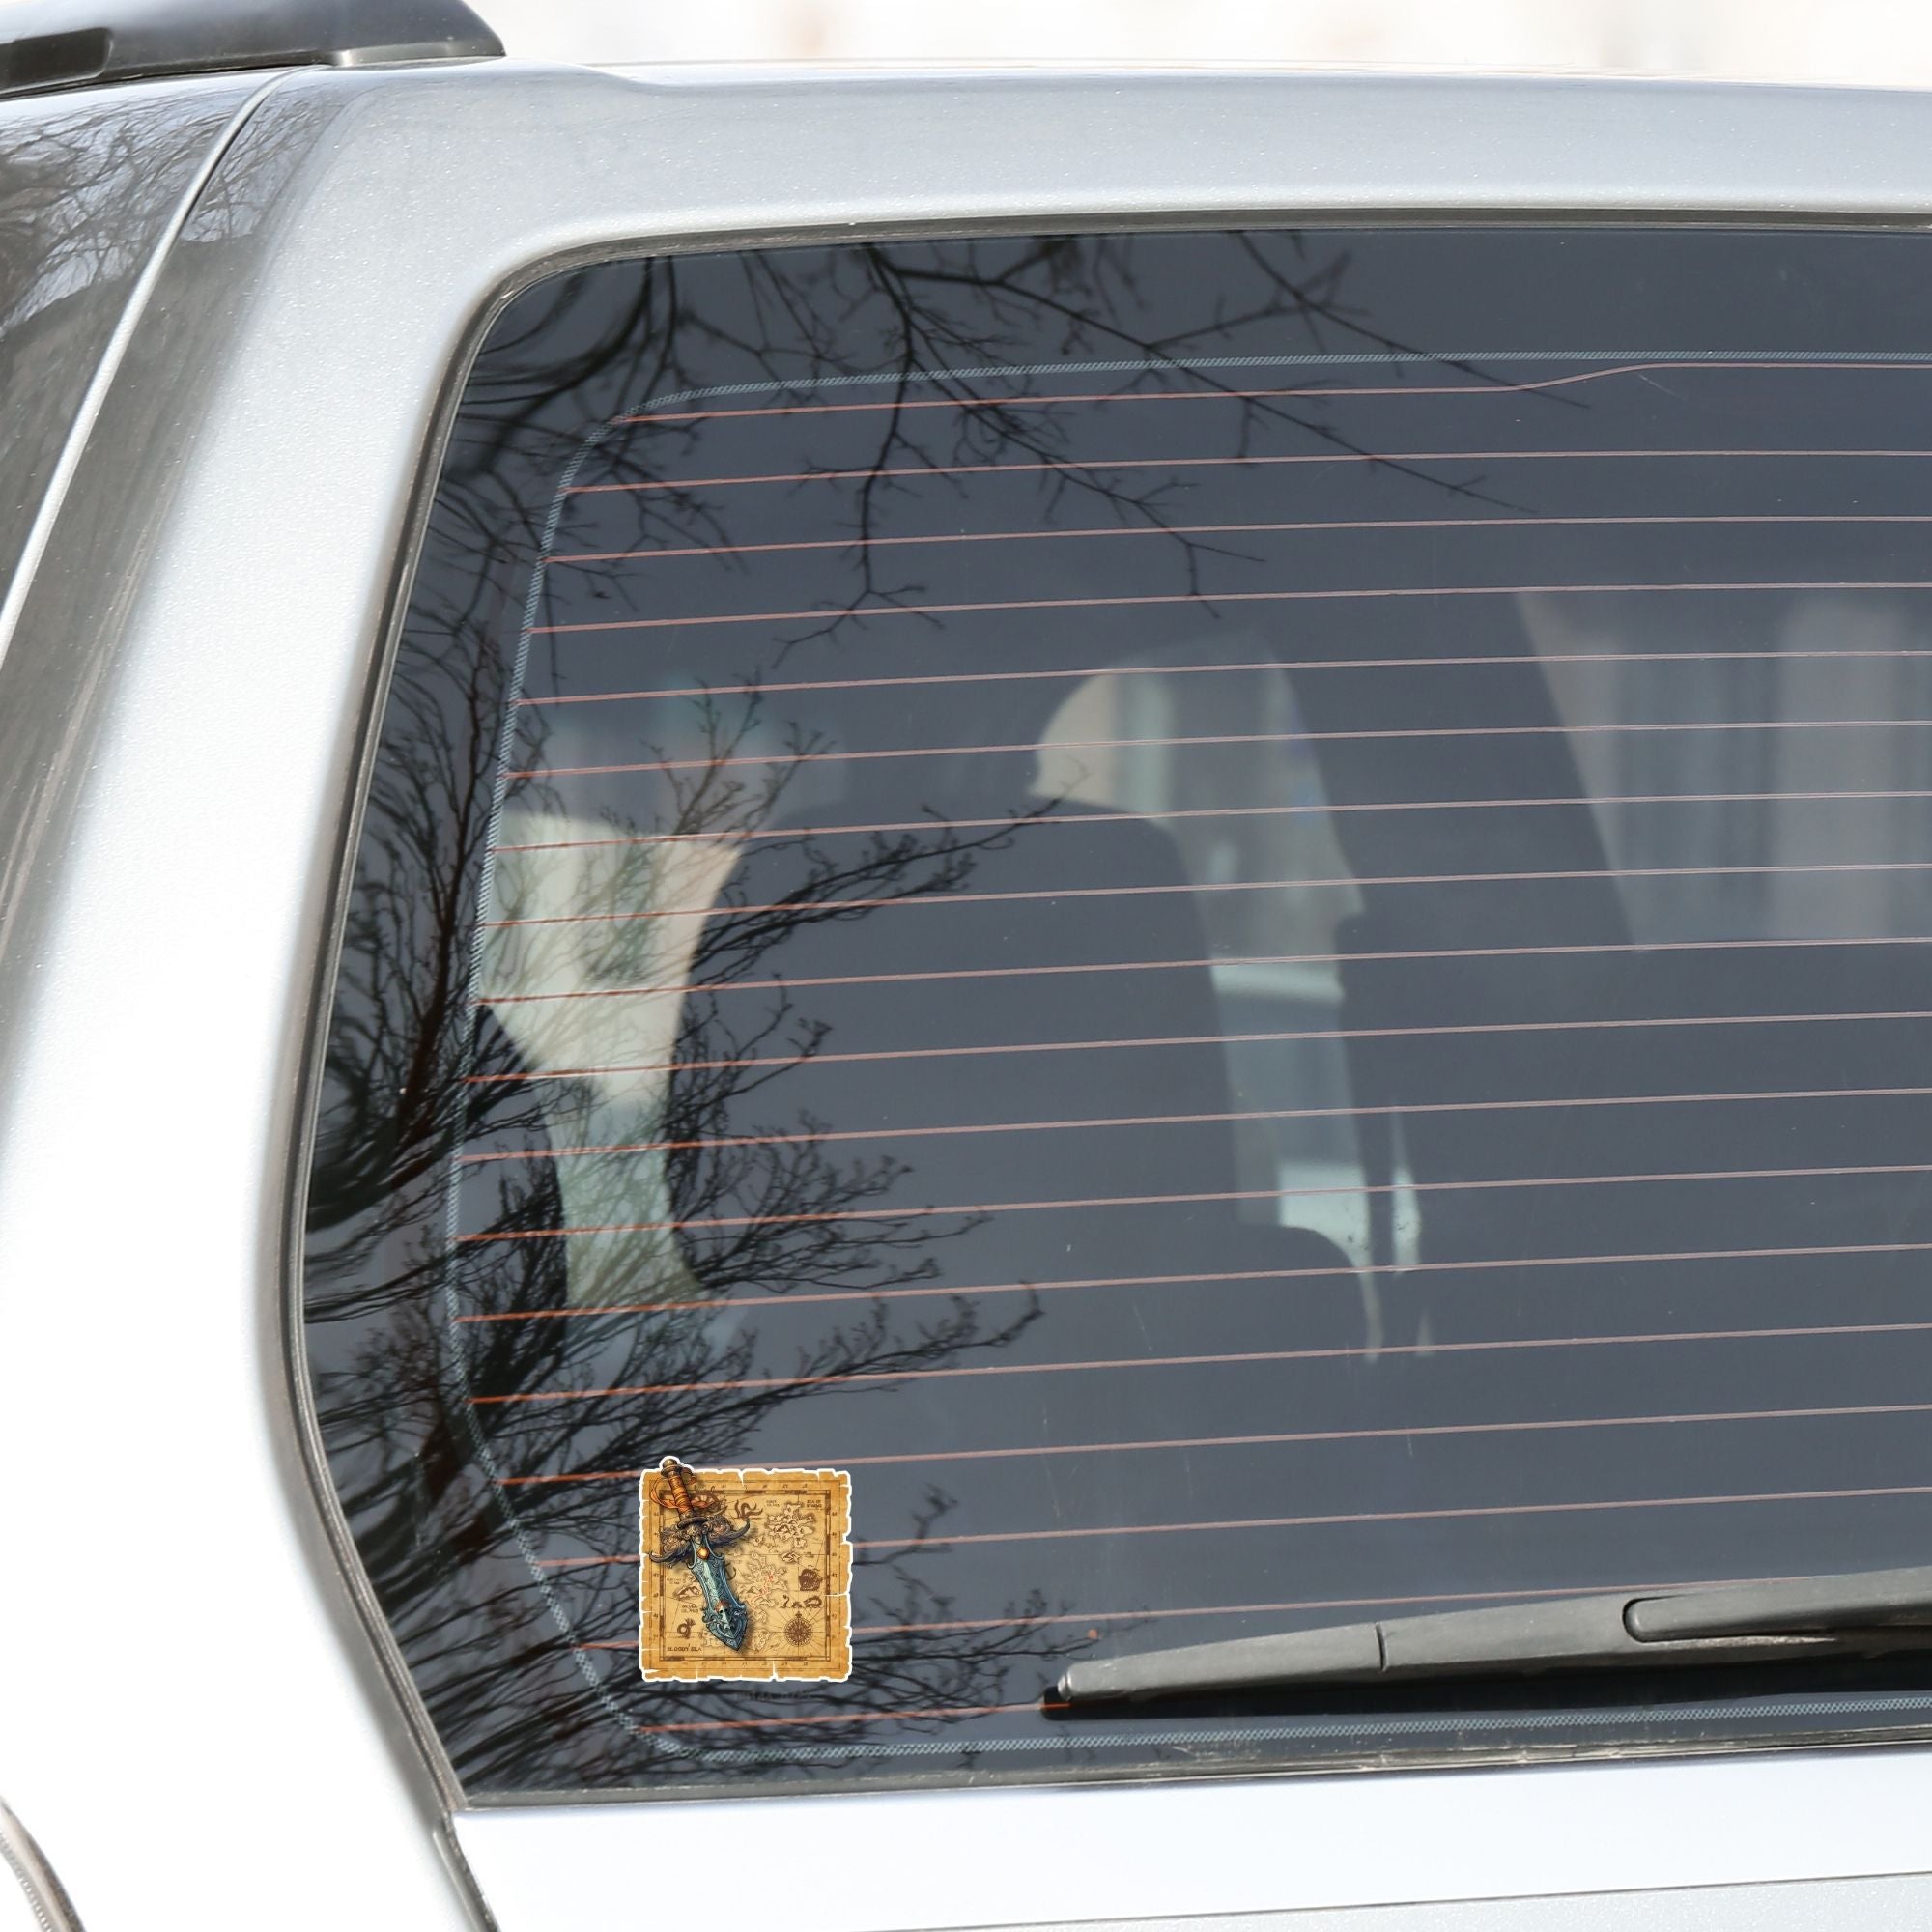 This image shows the Pirate Dagger on a Map Die-Cut Sticker on the back window of a car.